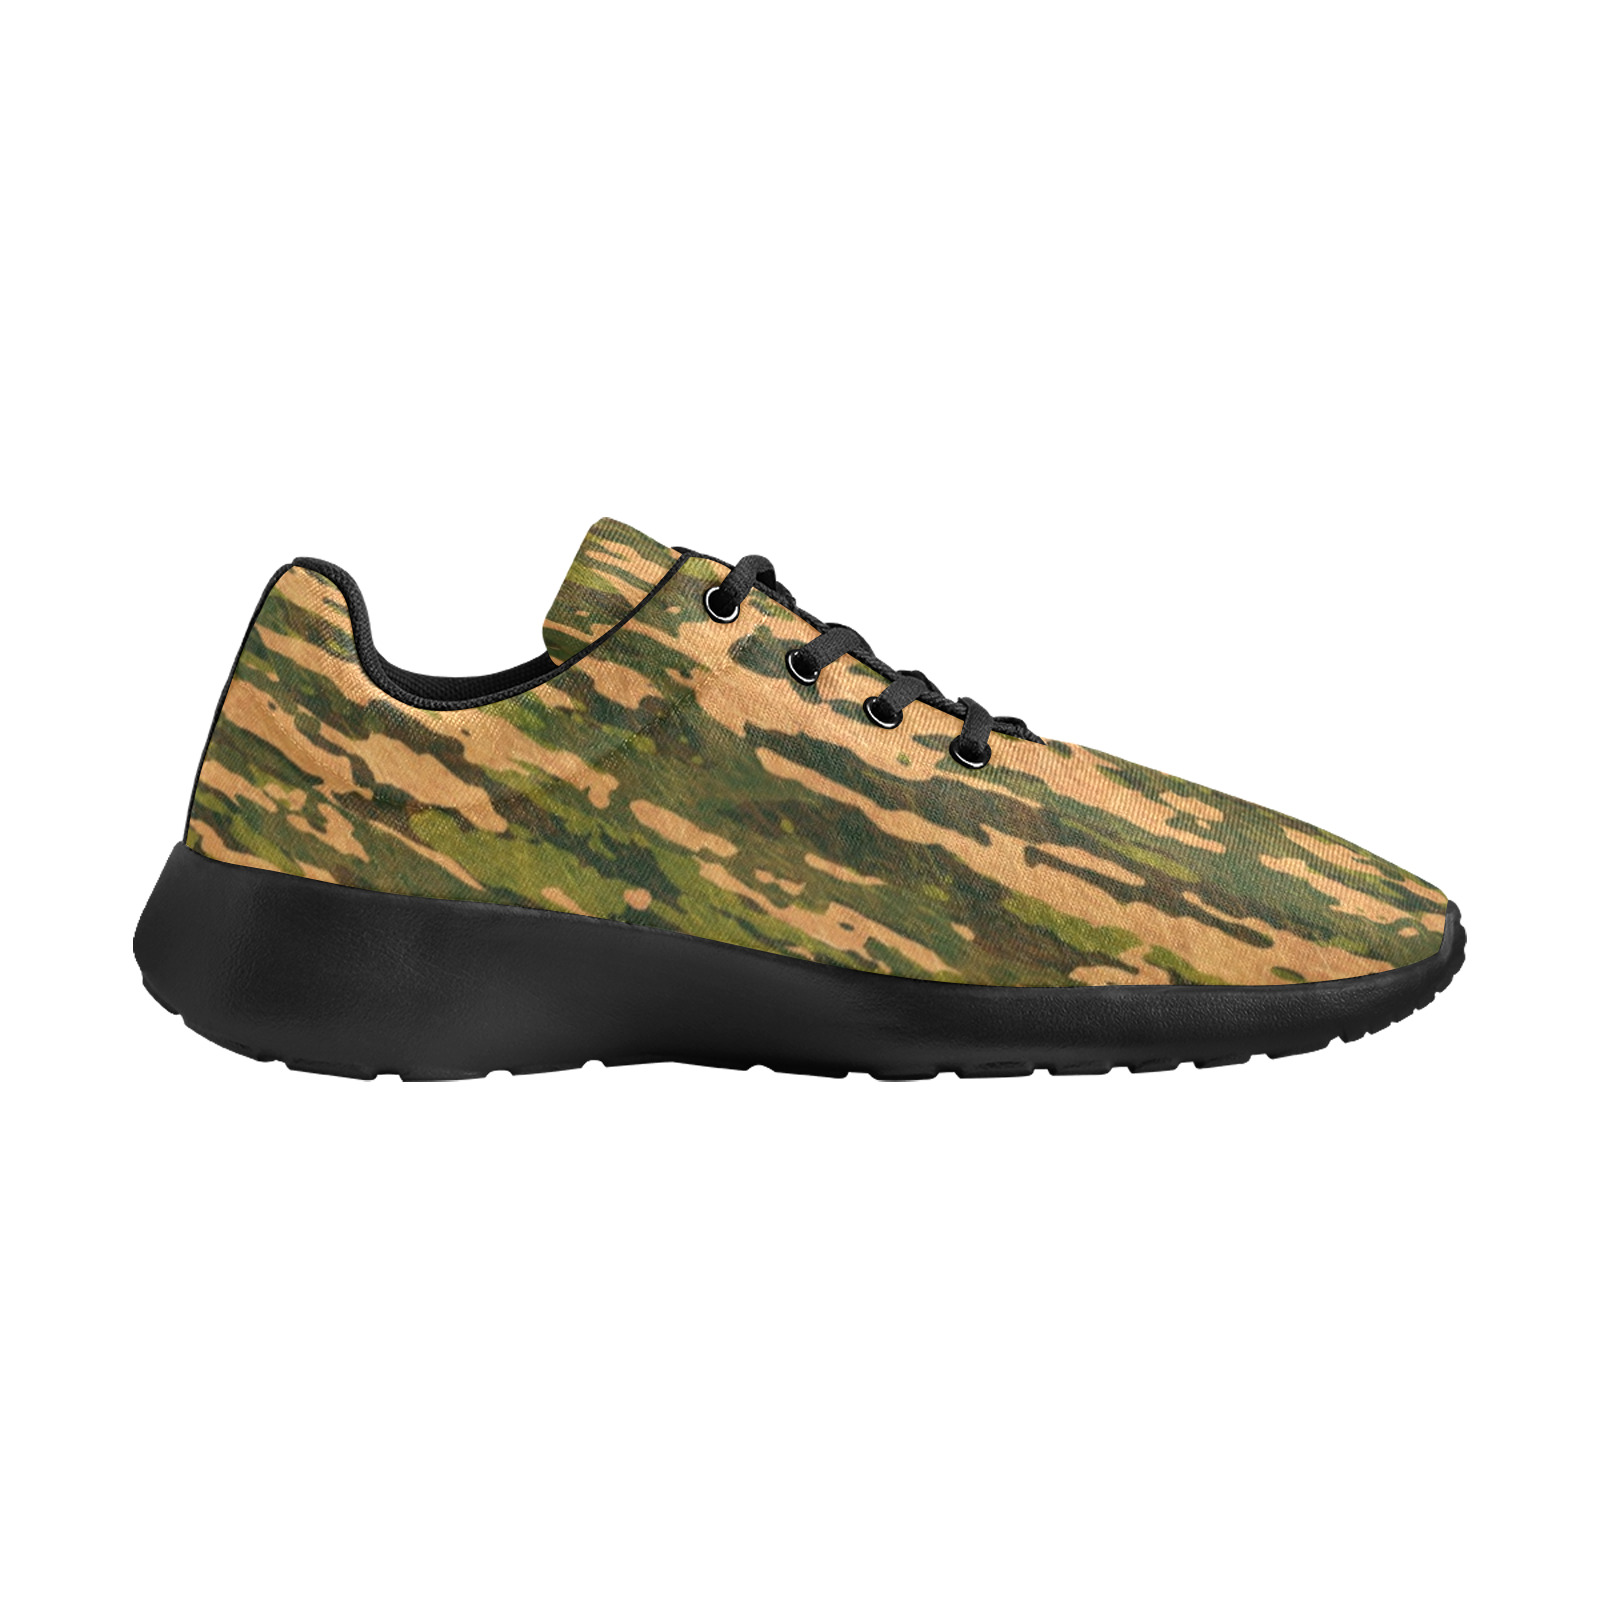 Bark Trunk Tree Camouflage Women's Athletic Shoes (Model 0200)